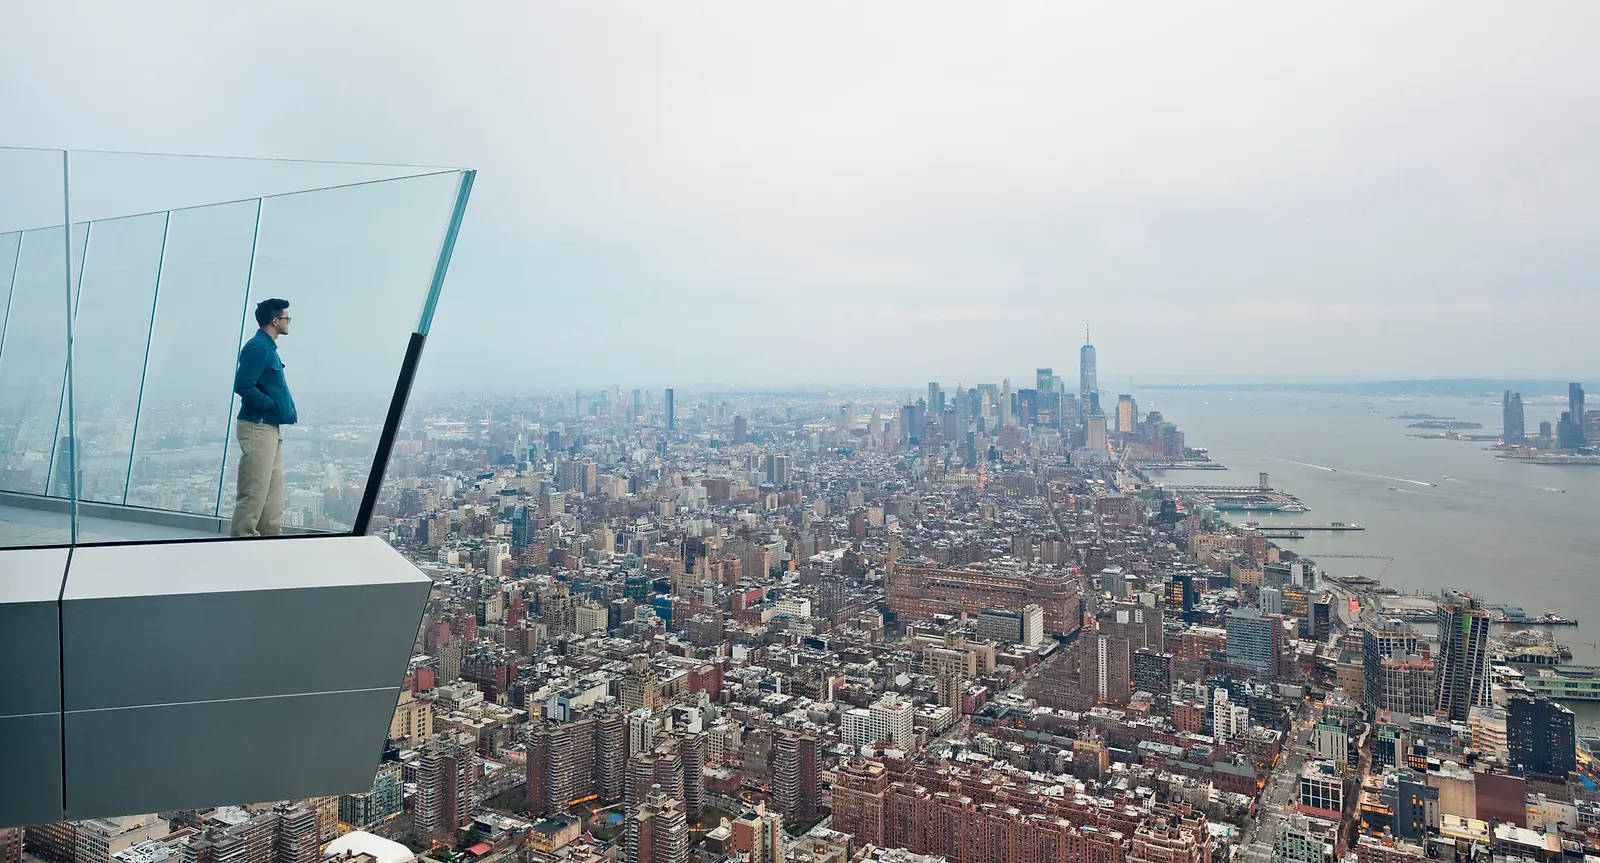 NYC: Edge observation deck opens at Hudson Yards - Los Angeles Times